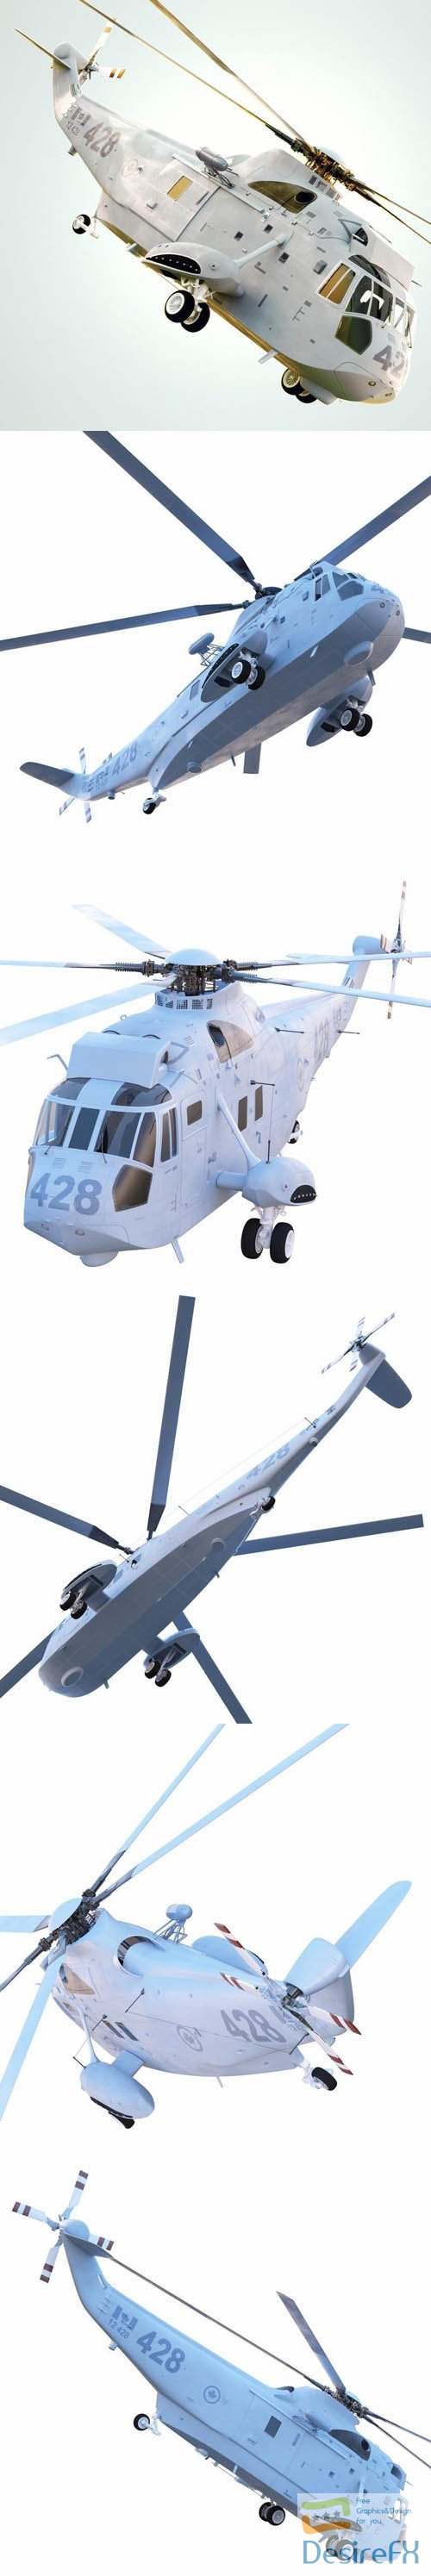 Sikorsky CH-124A Sea King - 3d model